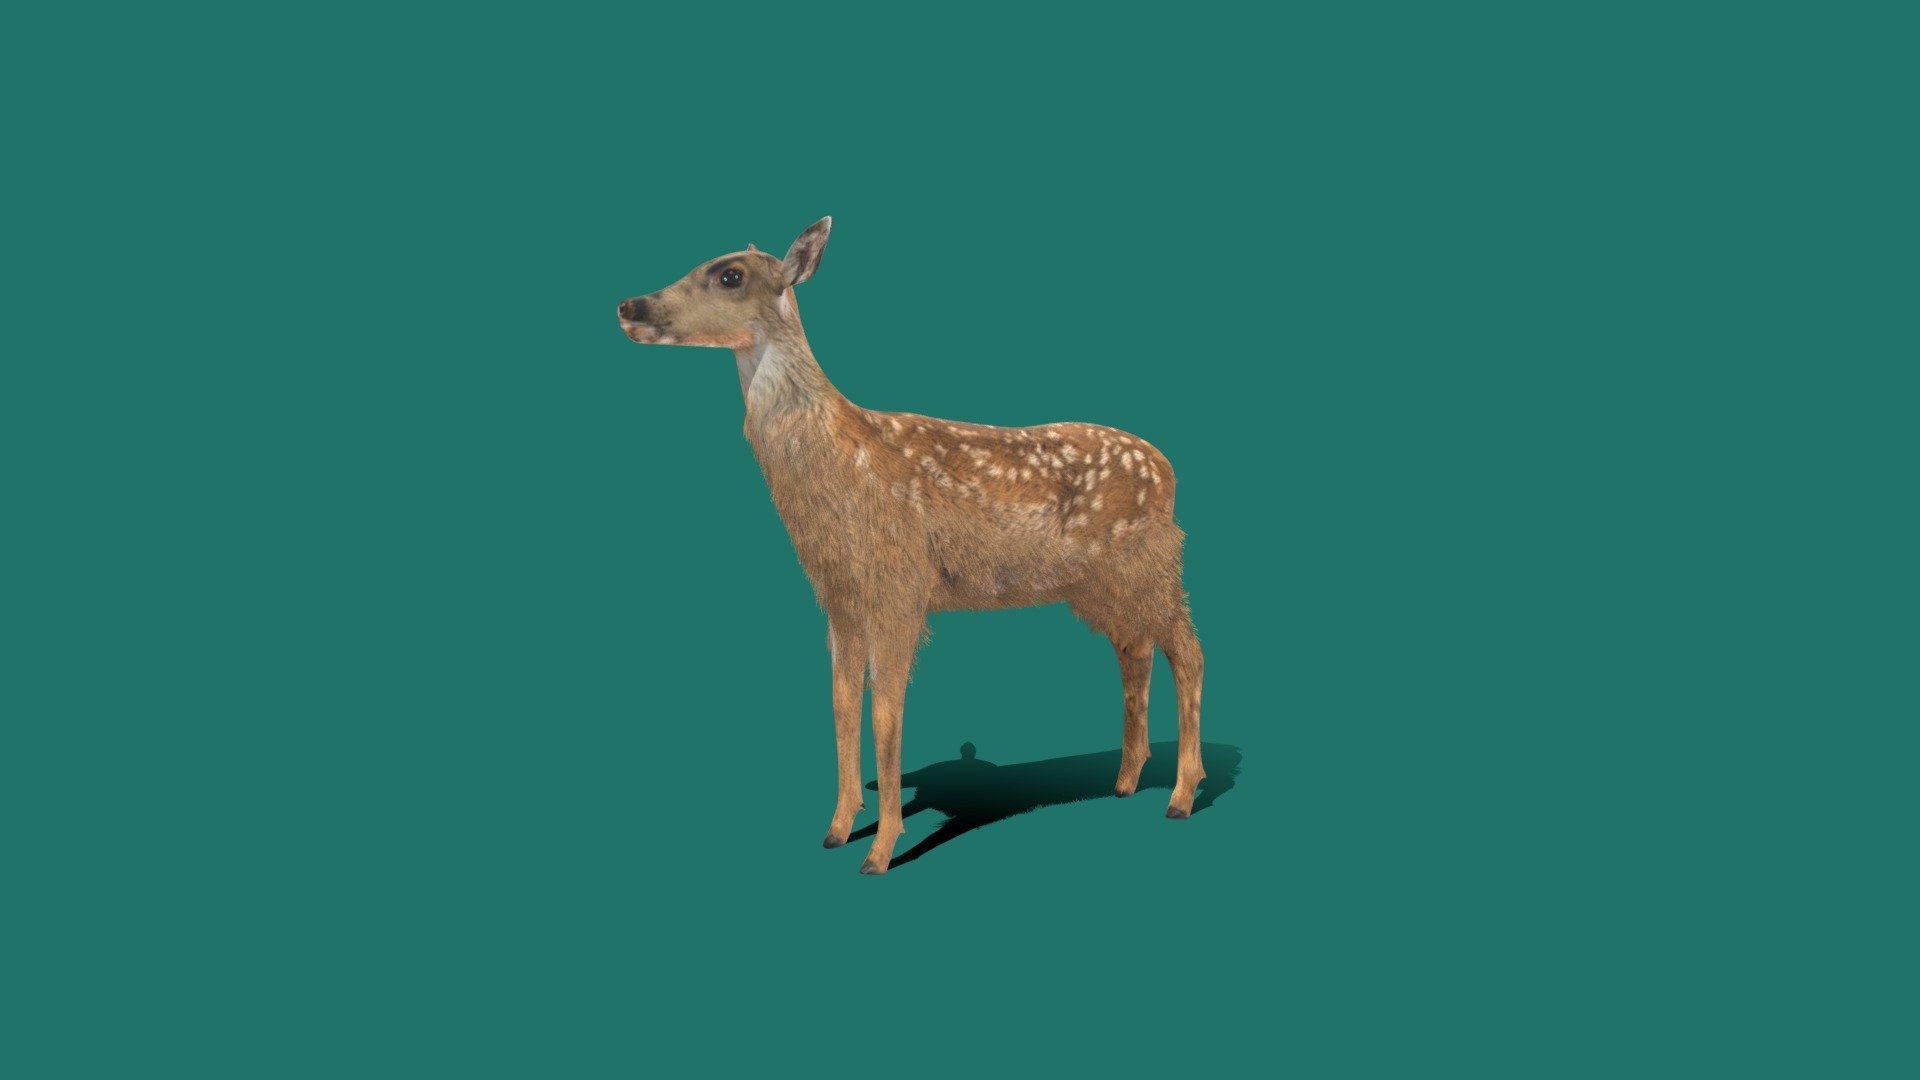 Game ready version with multiple animations
can be purchase thru blendermarket.thank you
https://sketchfab.com/3d-models/deer-animations-79dcfc14e4384937b87bfc38c3f68138
eating animations 
Deer or true deer are hoofed ruminant mammals forming the family Cervidae. The two main groups of deer are the Cervinae, including the muntjac, the elk, the red deer, and the fallow deer; and the Capreolinae, including the reindeer, white-tailed deer, the roe deer, and the moose 3d model